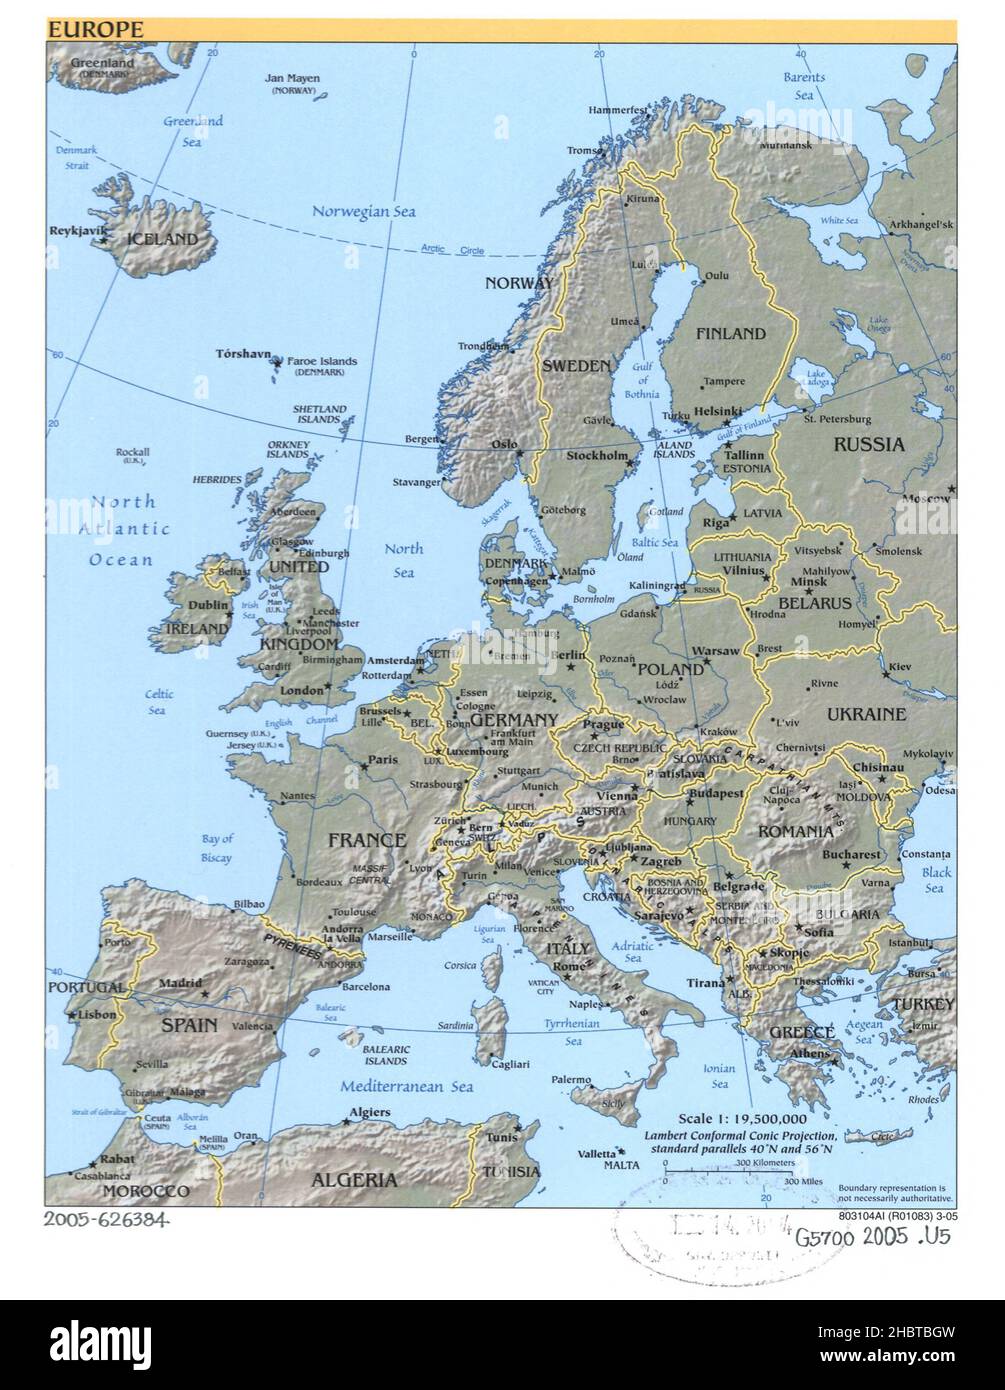 Map of Europe. Shows countries, capital cities, and other major cities. Relief shown by shading ca.  2005 Stock Photo